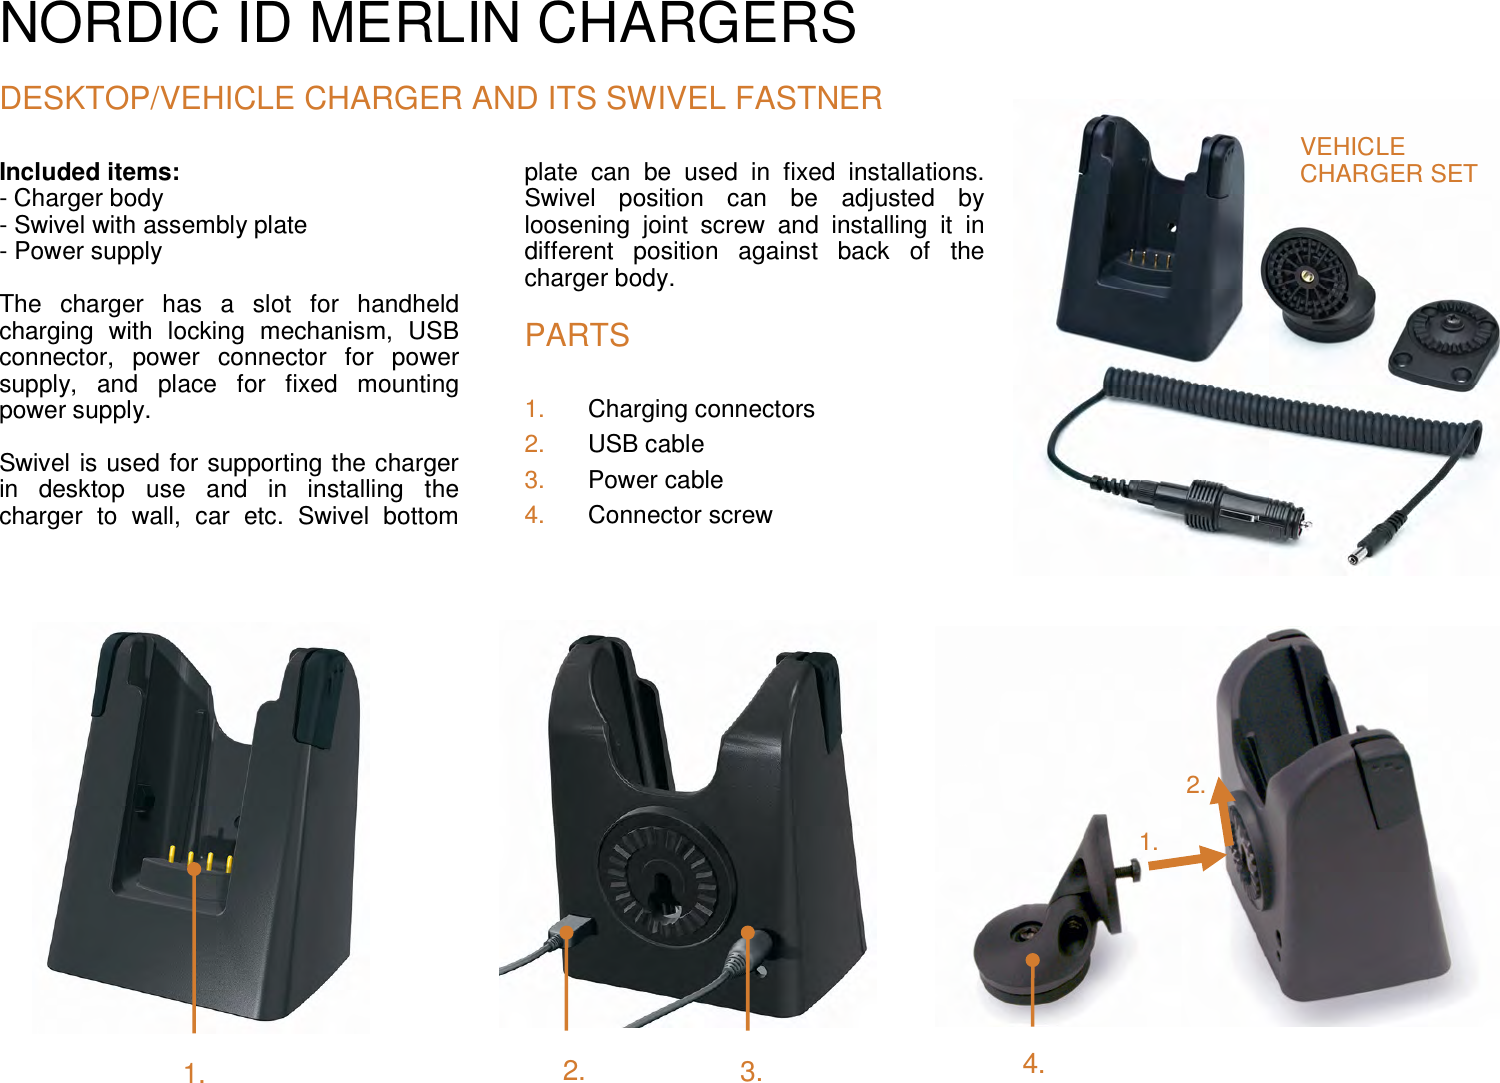 NORDIC ID MERLIN CHARGERS  DESKTOP/VEHICLE CHARGER AND ITS SWIVEL FASTNER Included items:  - Charger body - Swivel with assembly plate  - Power supply  The  charger  has  a  slot  for  handheld charging  with  locking  mechanism,  USB connector,  power  connector  for  power supply,  and  place  for  fixed  mounting power supply.  Swivel is used for supporting the charger in  desktop  use  and  in  installing  the charger  to  wall,  car  etc.  Swivel  bottom plate  can  be  used  in  fixed  installations. Swivel  position  can  be  adjusted  by loosening  joint  screw  and  installing  it  in different  position  against  back  of  the charger body.  PARTS 1.  Charging connectors 2.  USB cable 3.  Power cable 4.  Connector screw              VEHICLE  CHARGER SET 1. 2. 3. 2. 1. 4. 